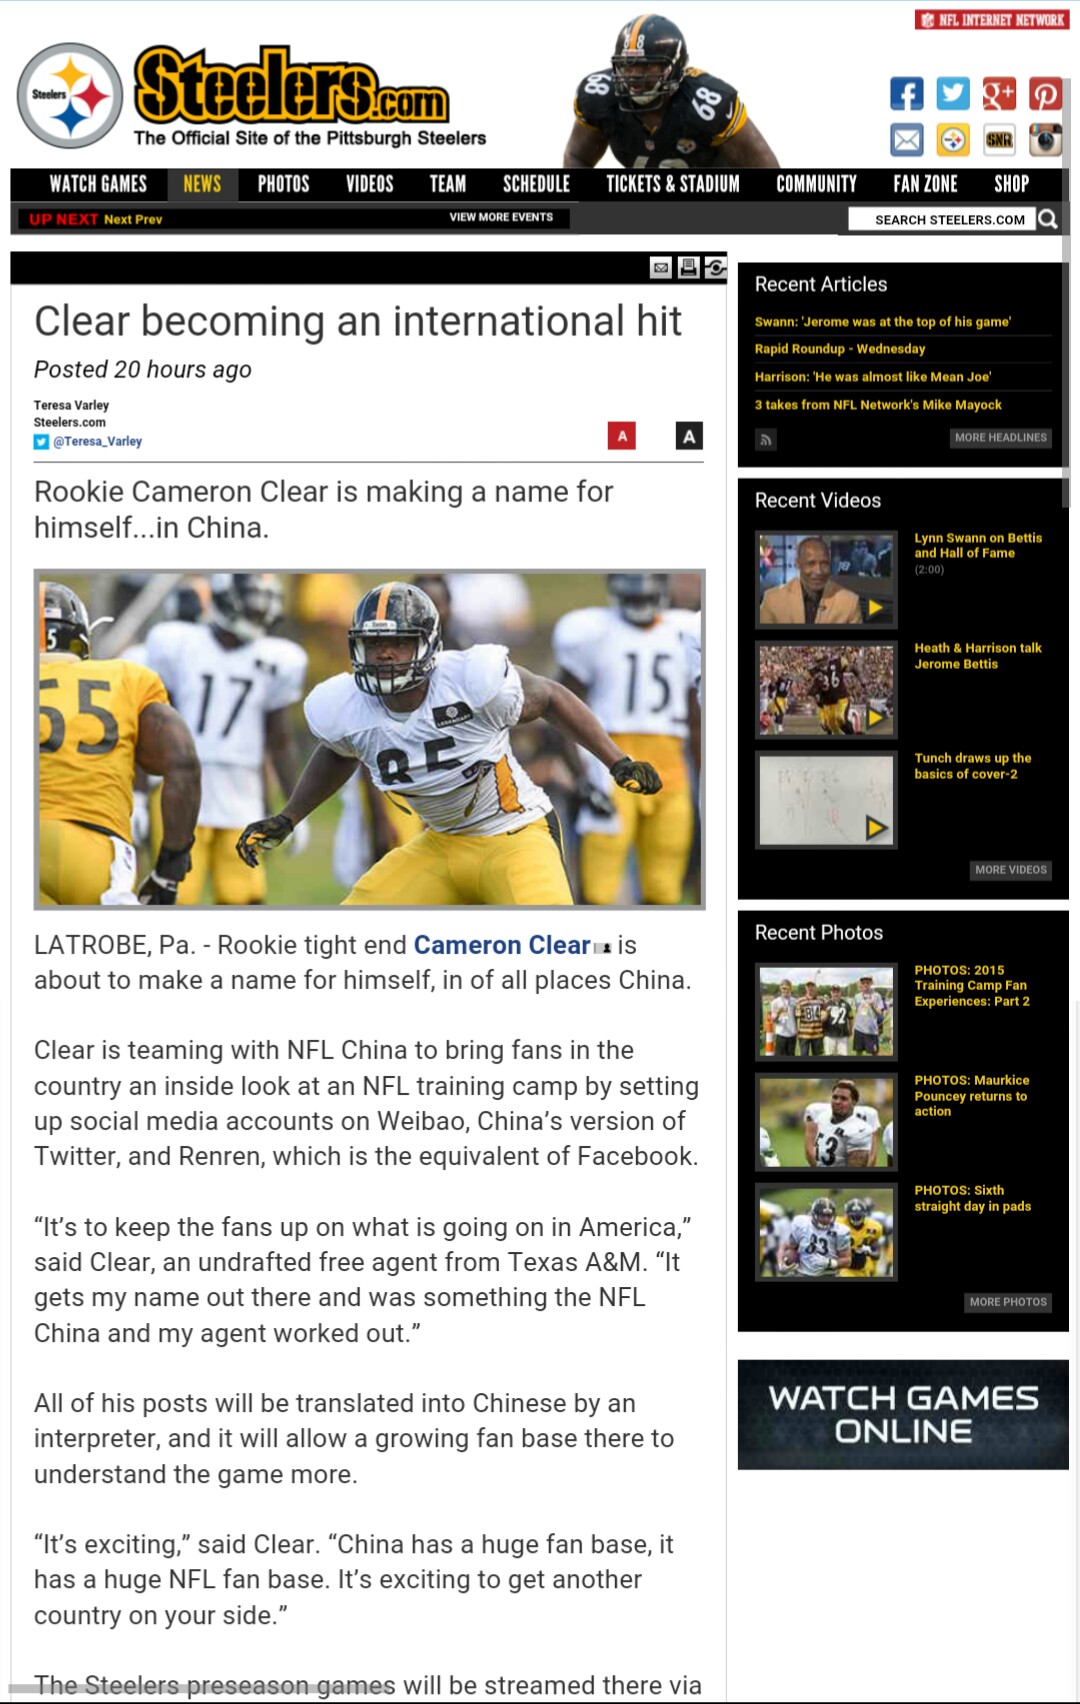  The Steelers official site headline story 